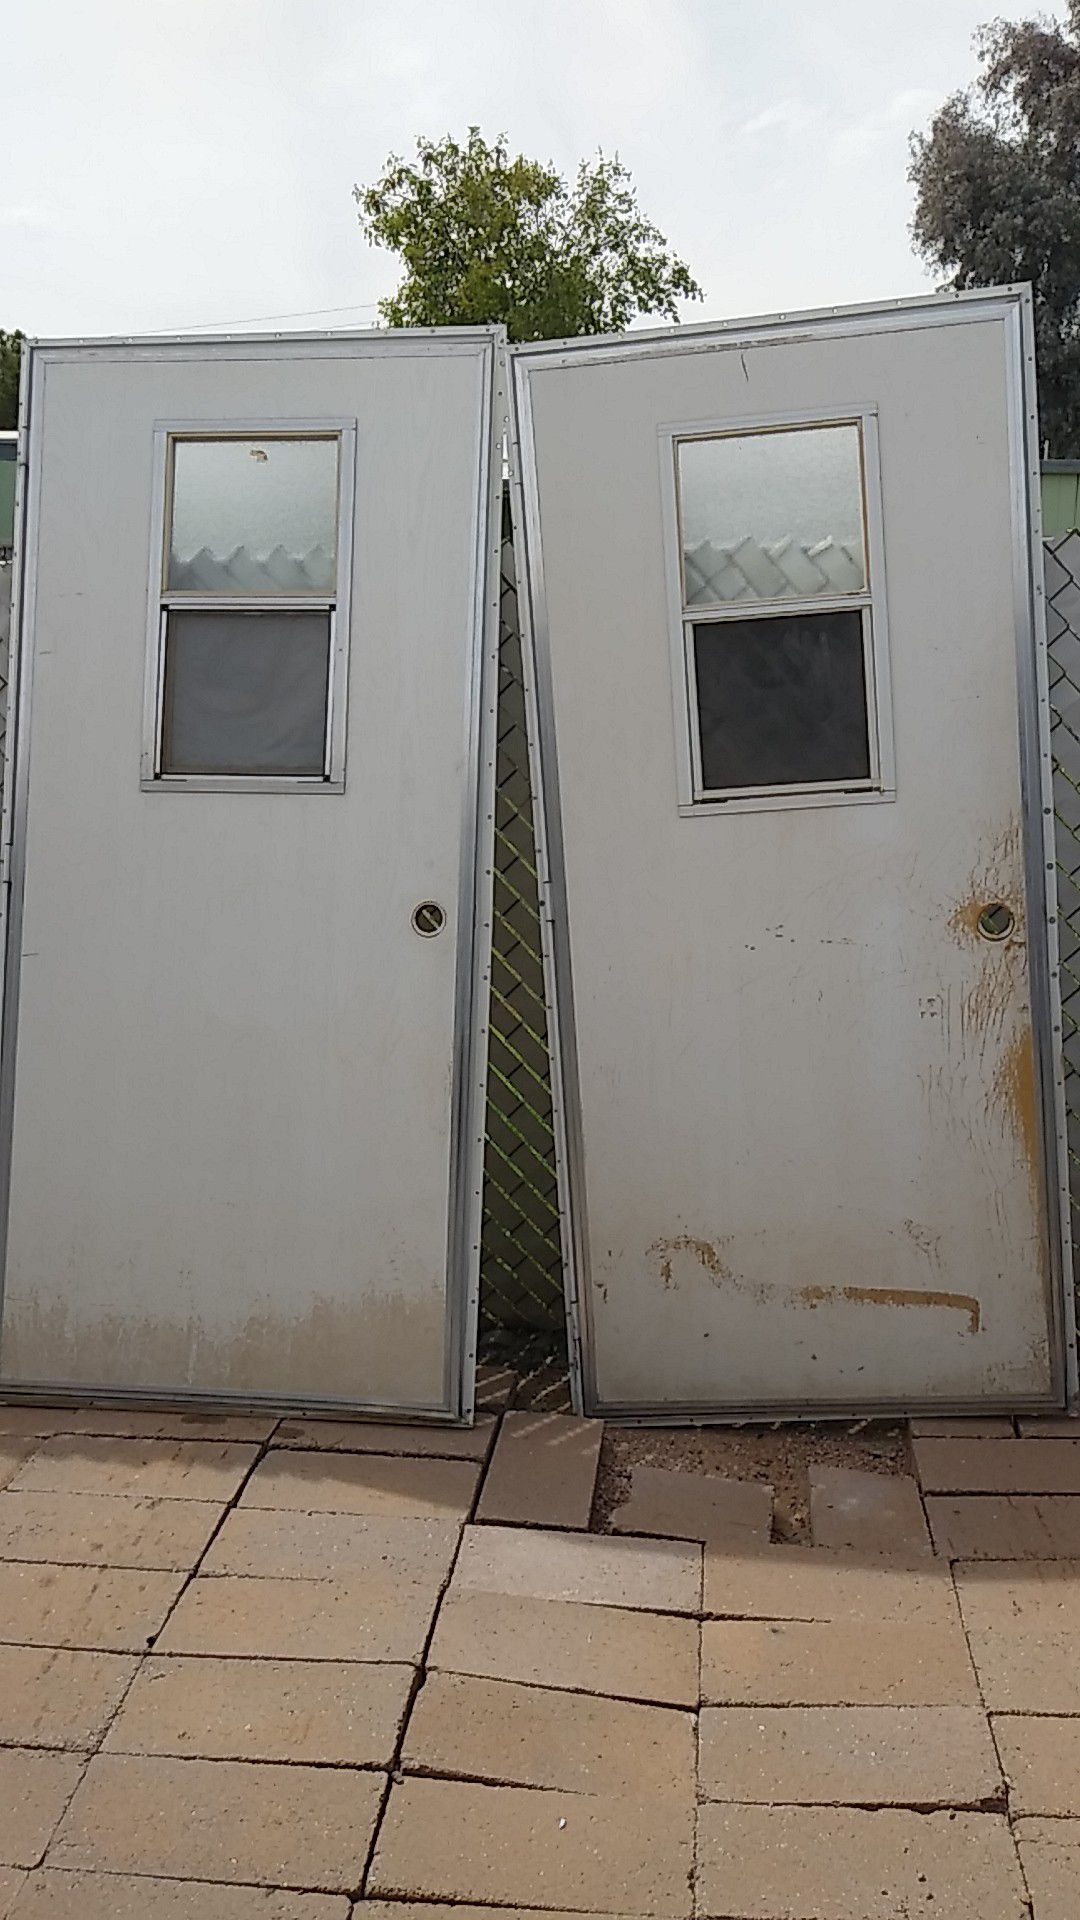 2 36x80 used exterior mobile home doors or shed doors with frame